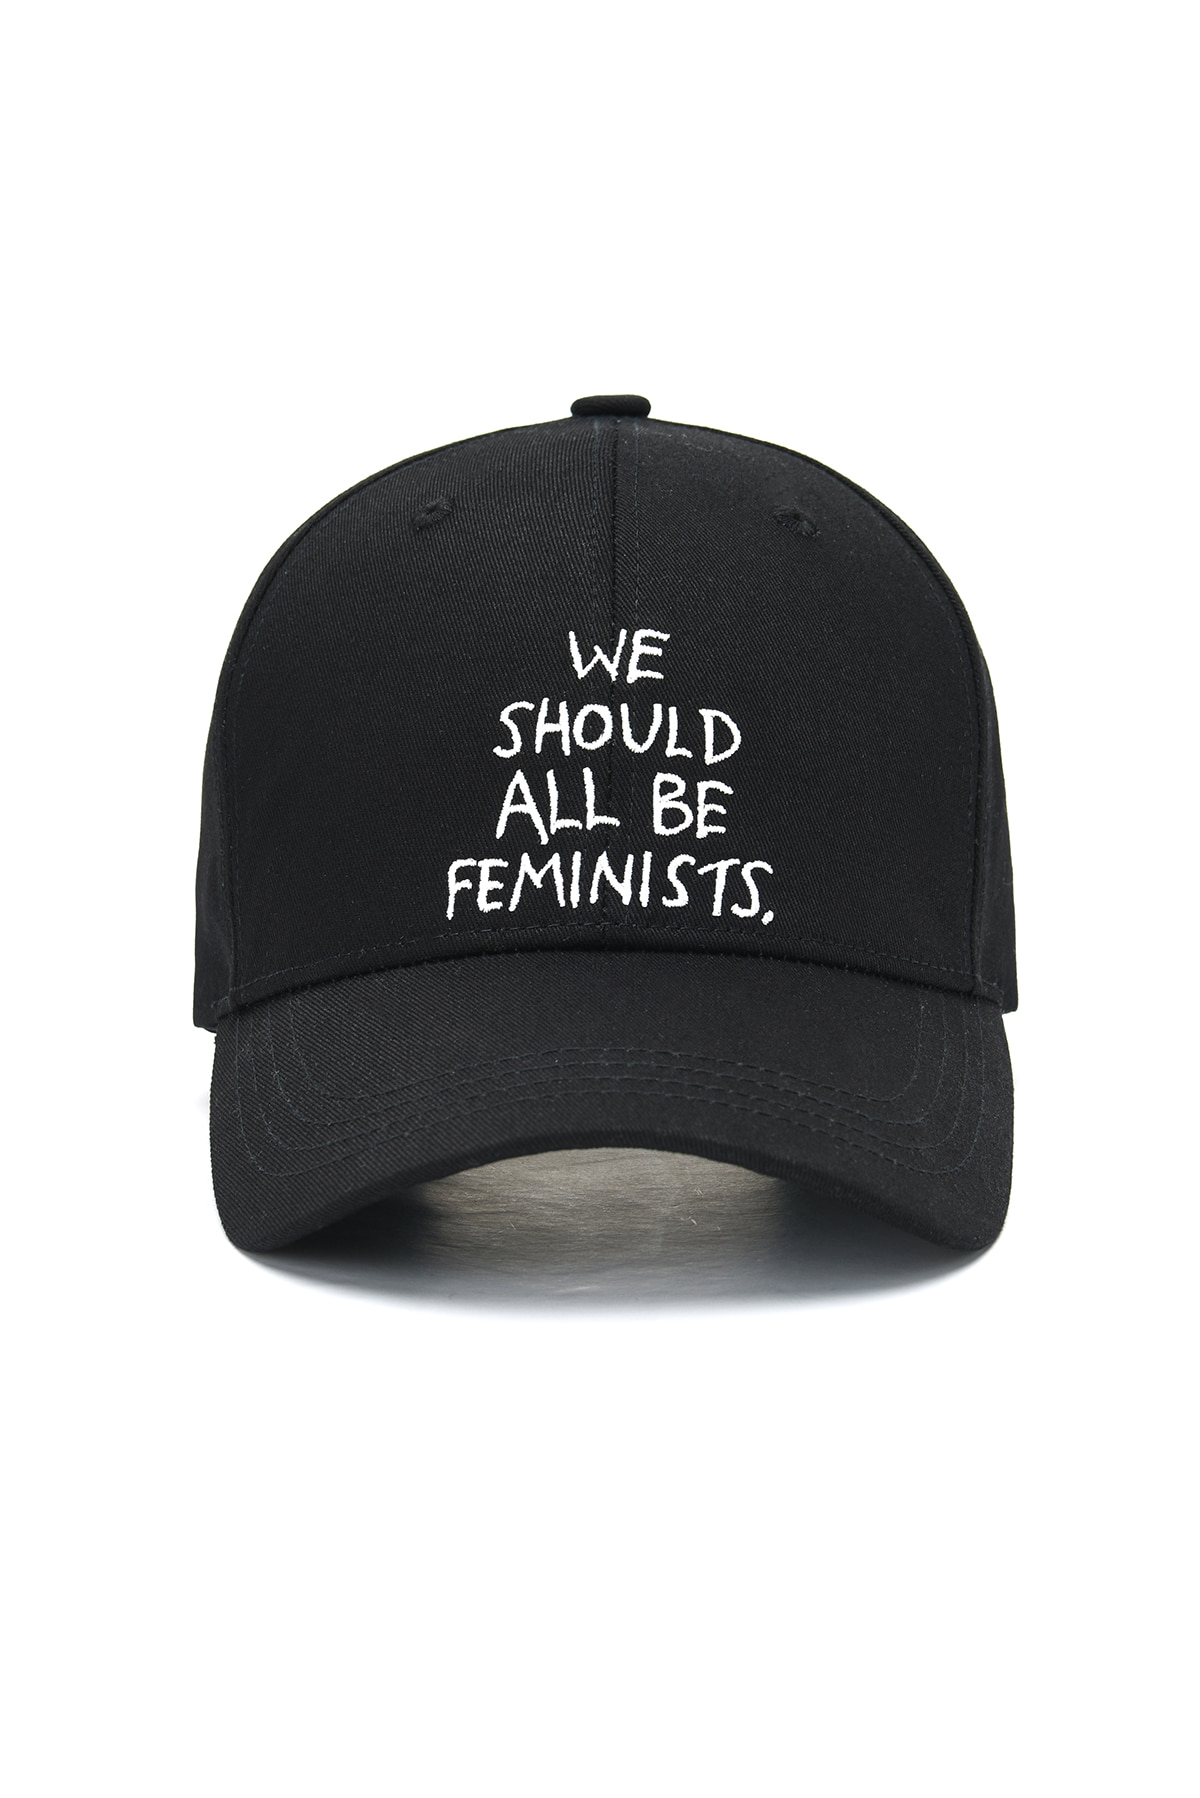 &quot;WE SHOULD ALL BE FEMINISTS&quot; EMBROIDERED BALL CAP BLACK